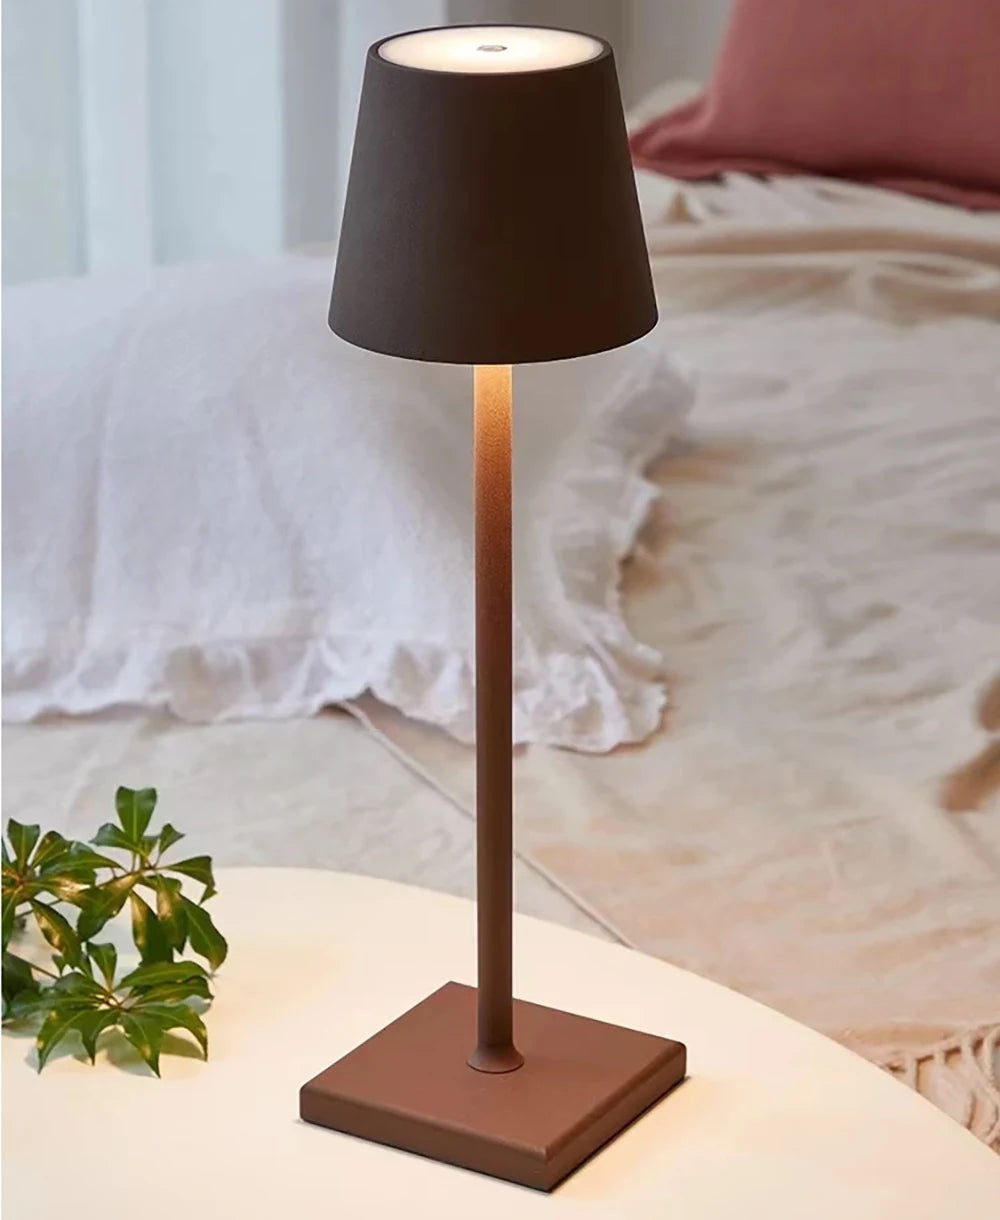 LED Lamp Bedside Table Vintage Dimmable 5200 mAh Battery Operated Waterproof IP54 Wireless Table Lamp Candle Warmer 3000K USB